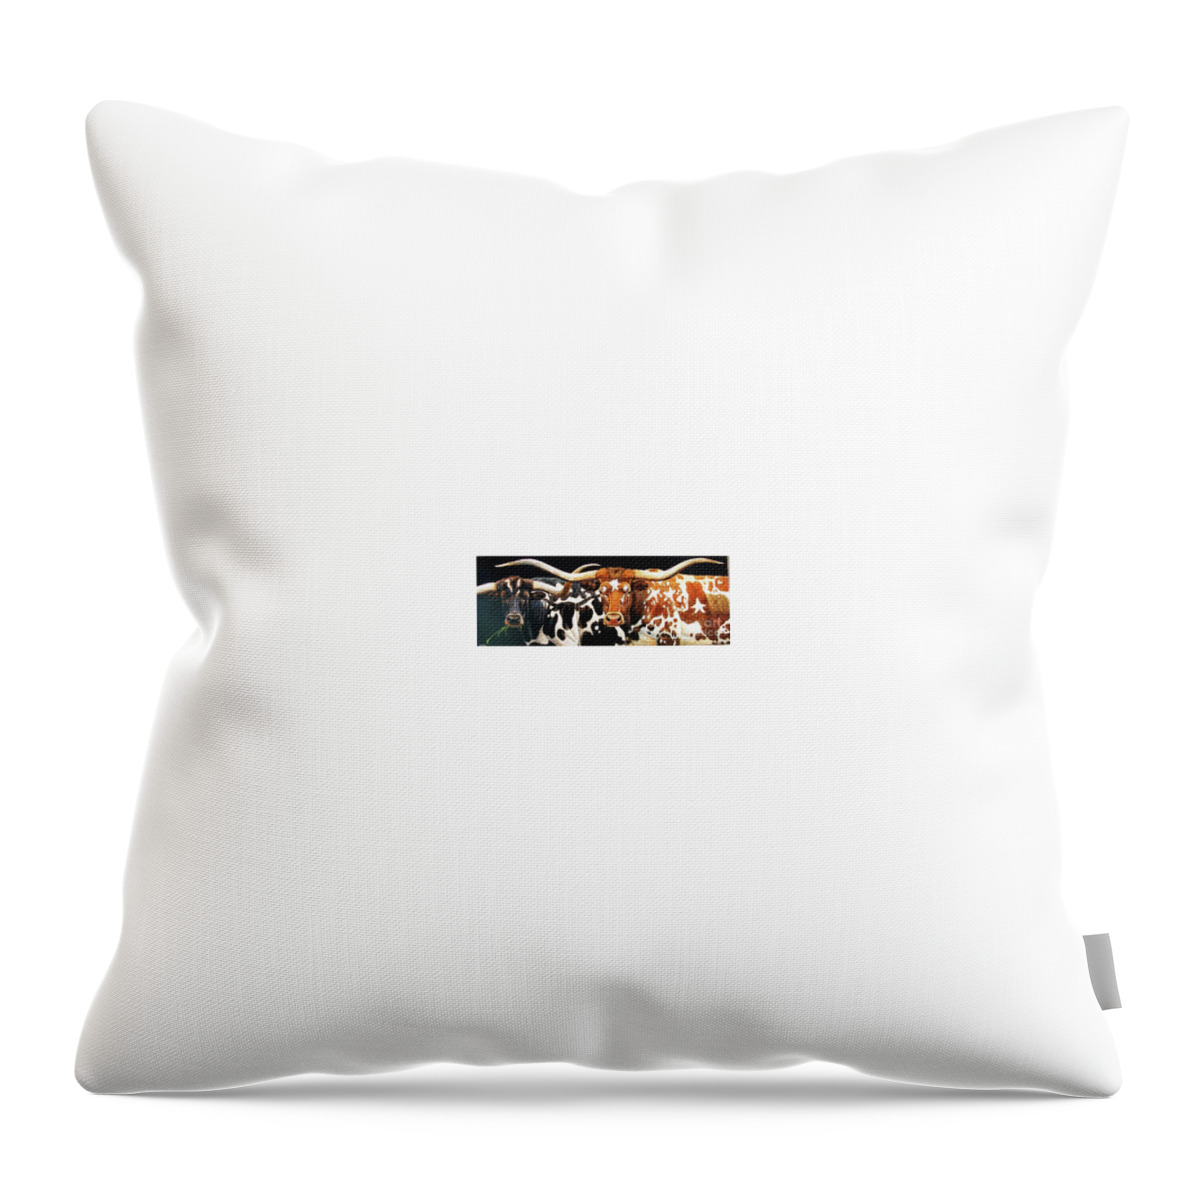 Cynthie Fisher Throw Pillow featuring the painting Cf Humorous Steers by Cynthie Fisher